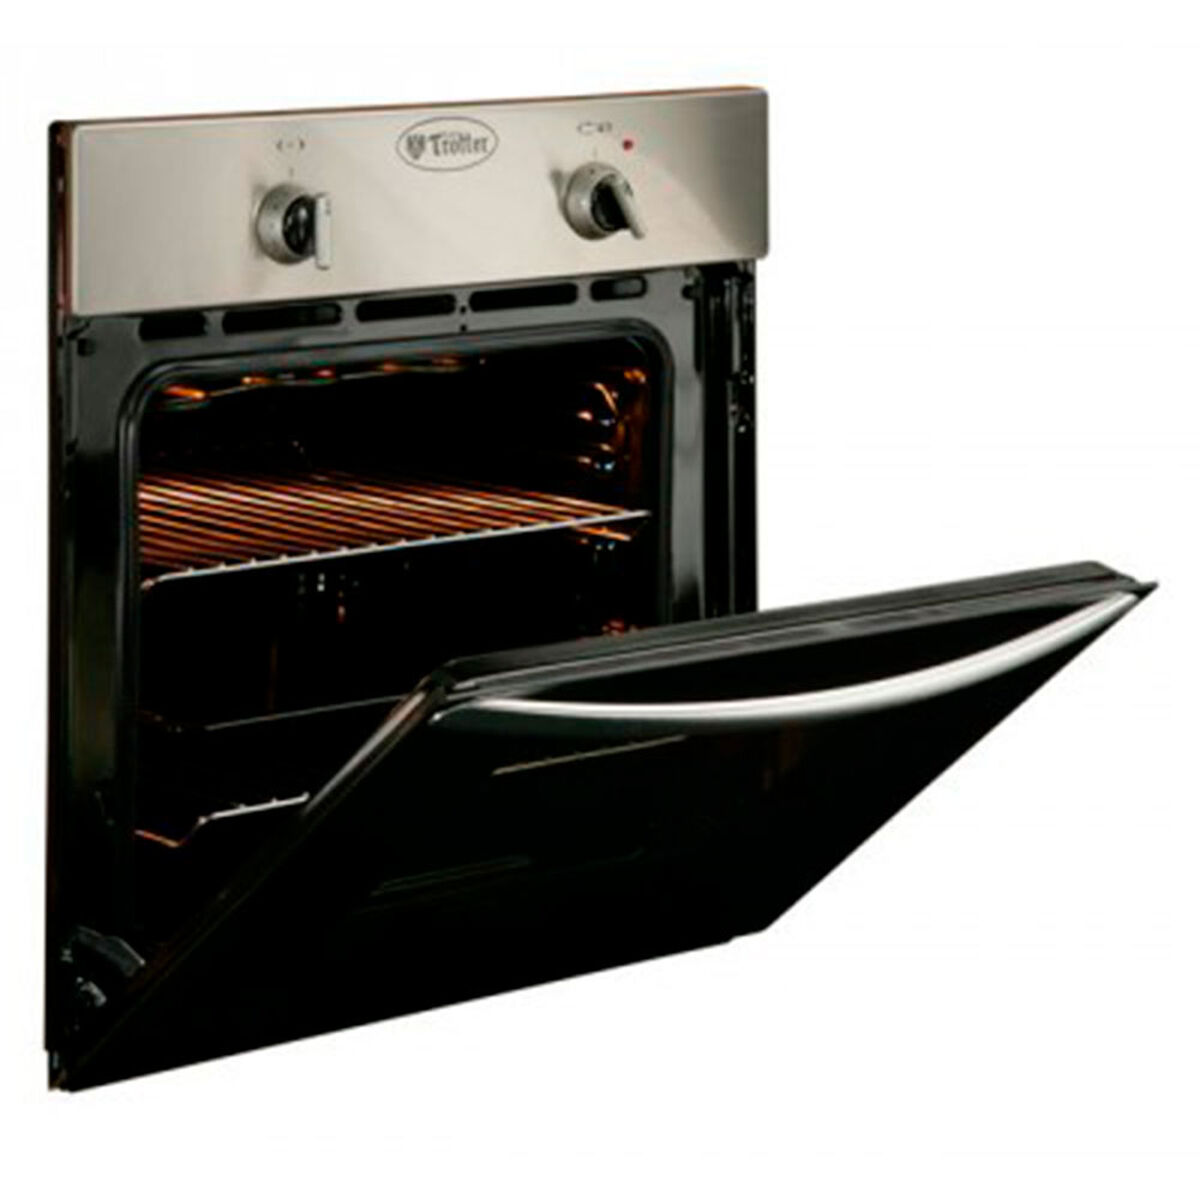 Horno a Gas Albin Trotter AT Hammer N8 52 lt